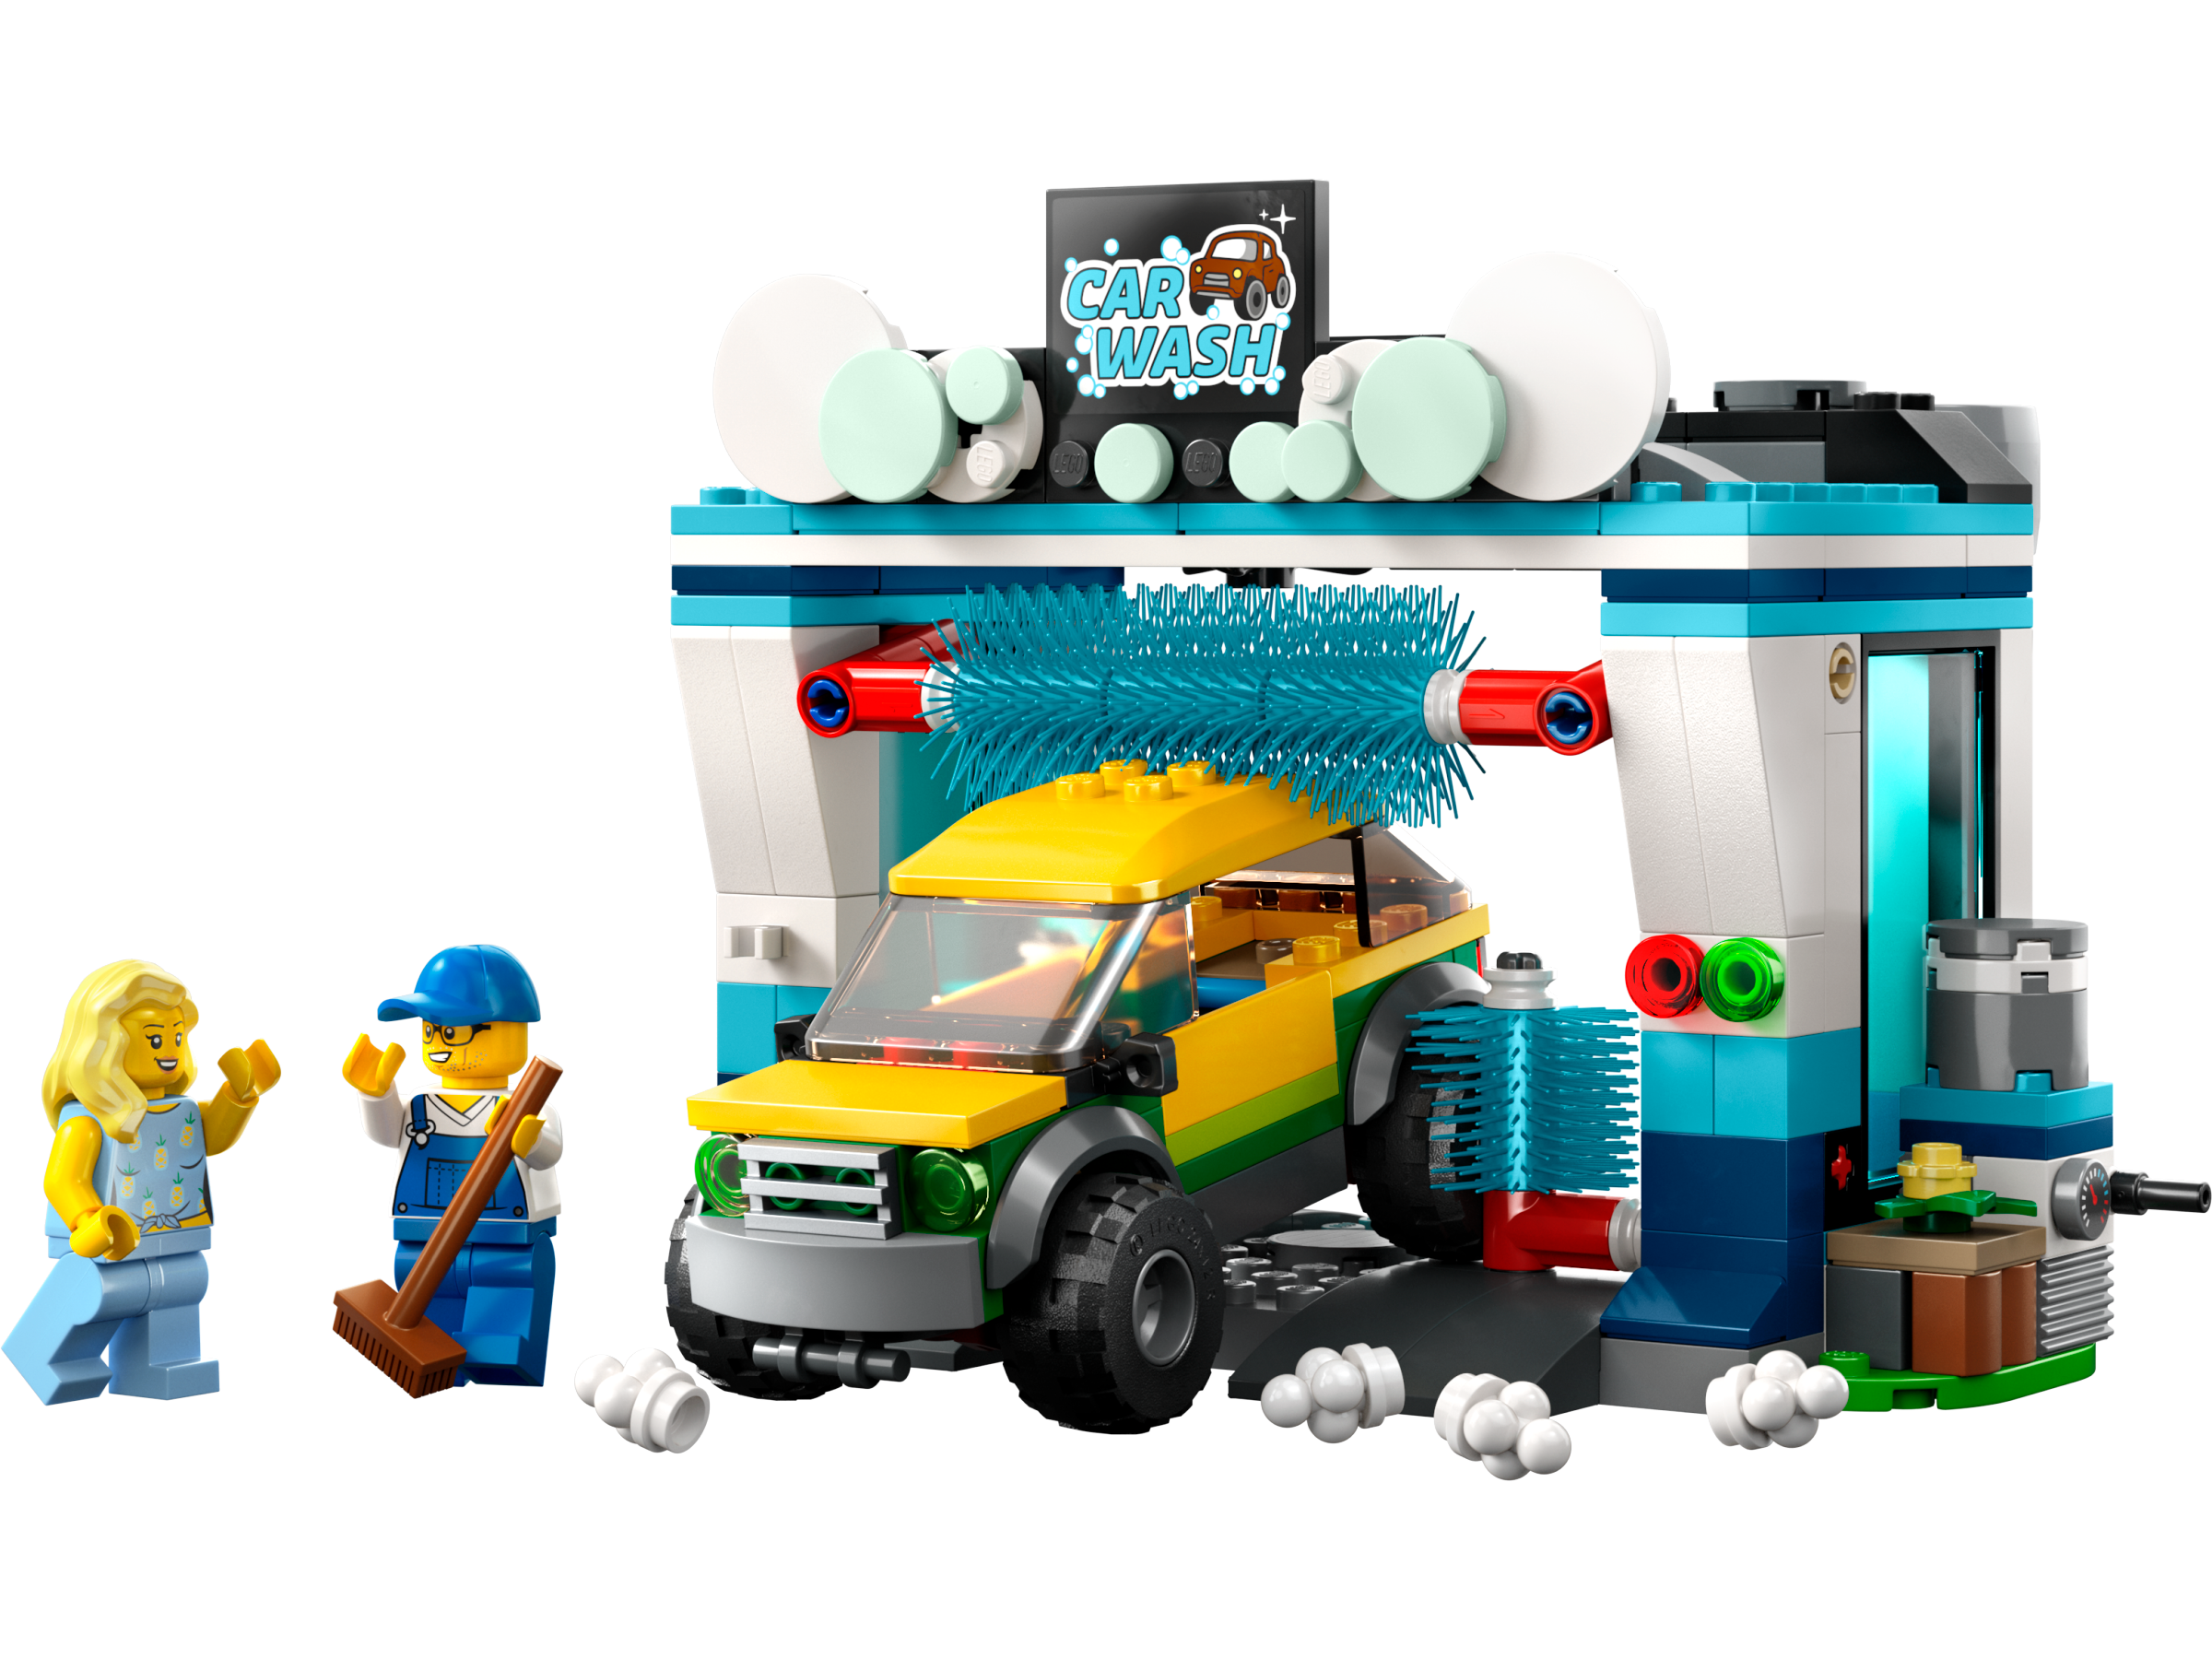 Wash 60362 | City | Buy online at the Official LEGO® Shop